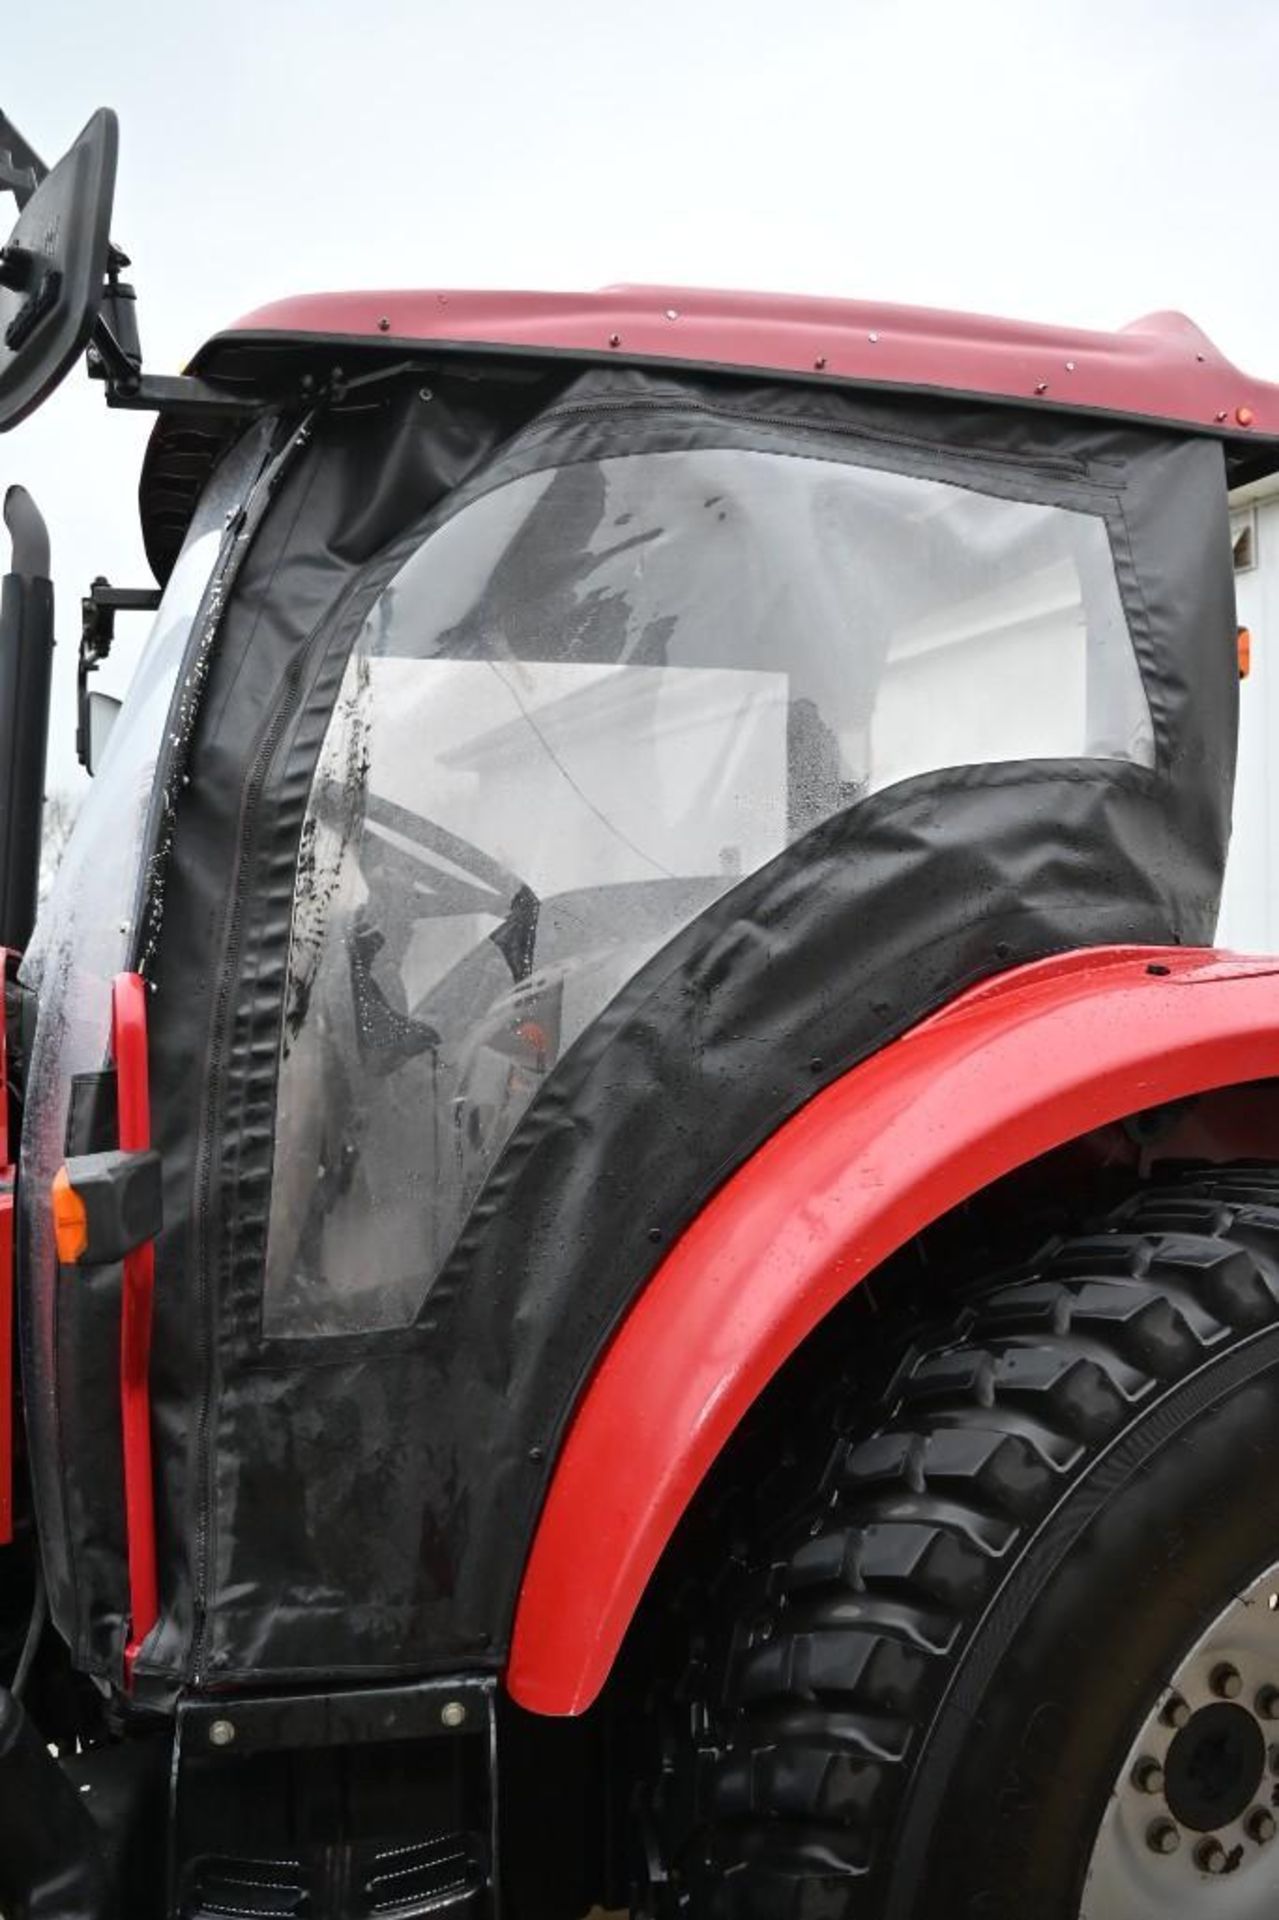 2015 Case IH 75C Tractor - Image 28 of 135